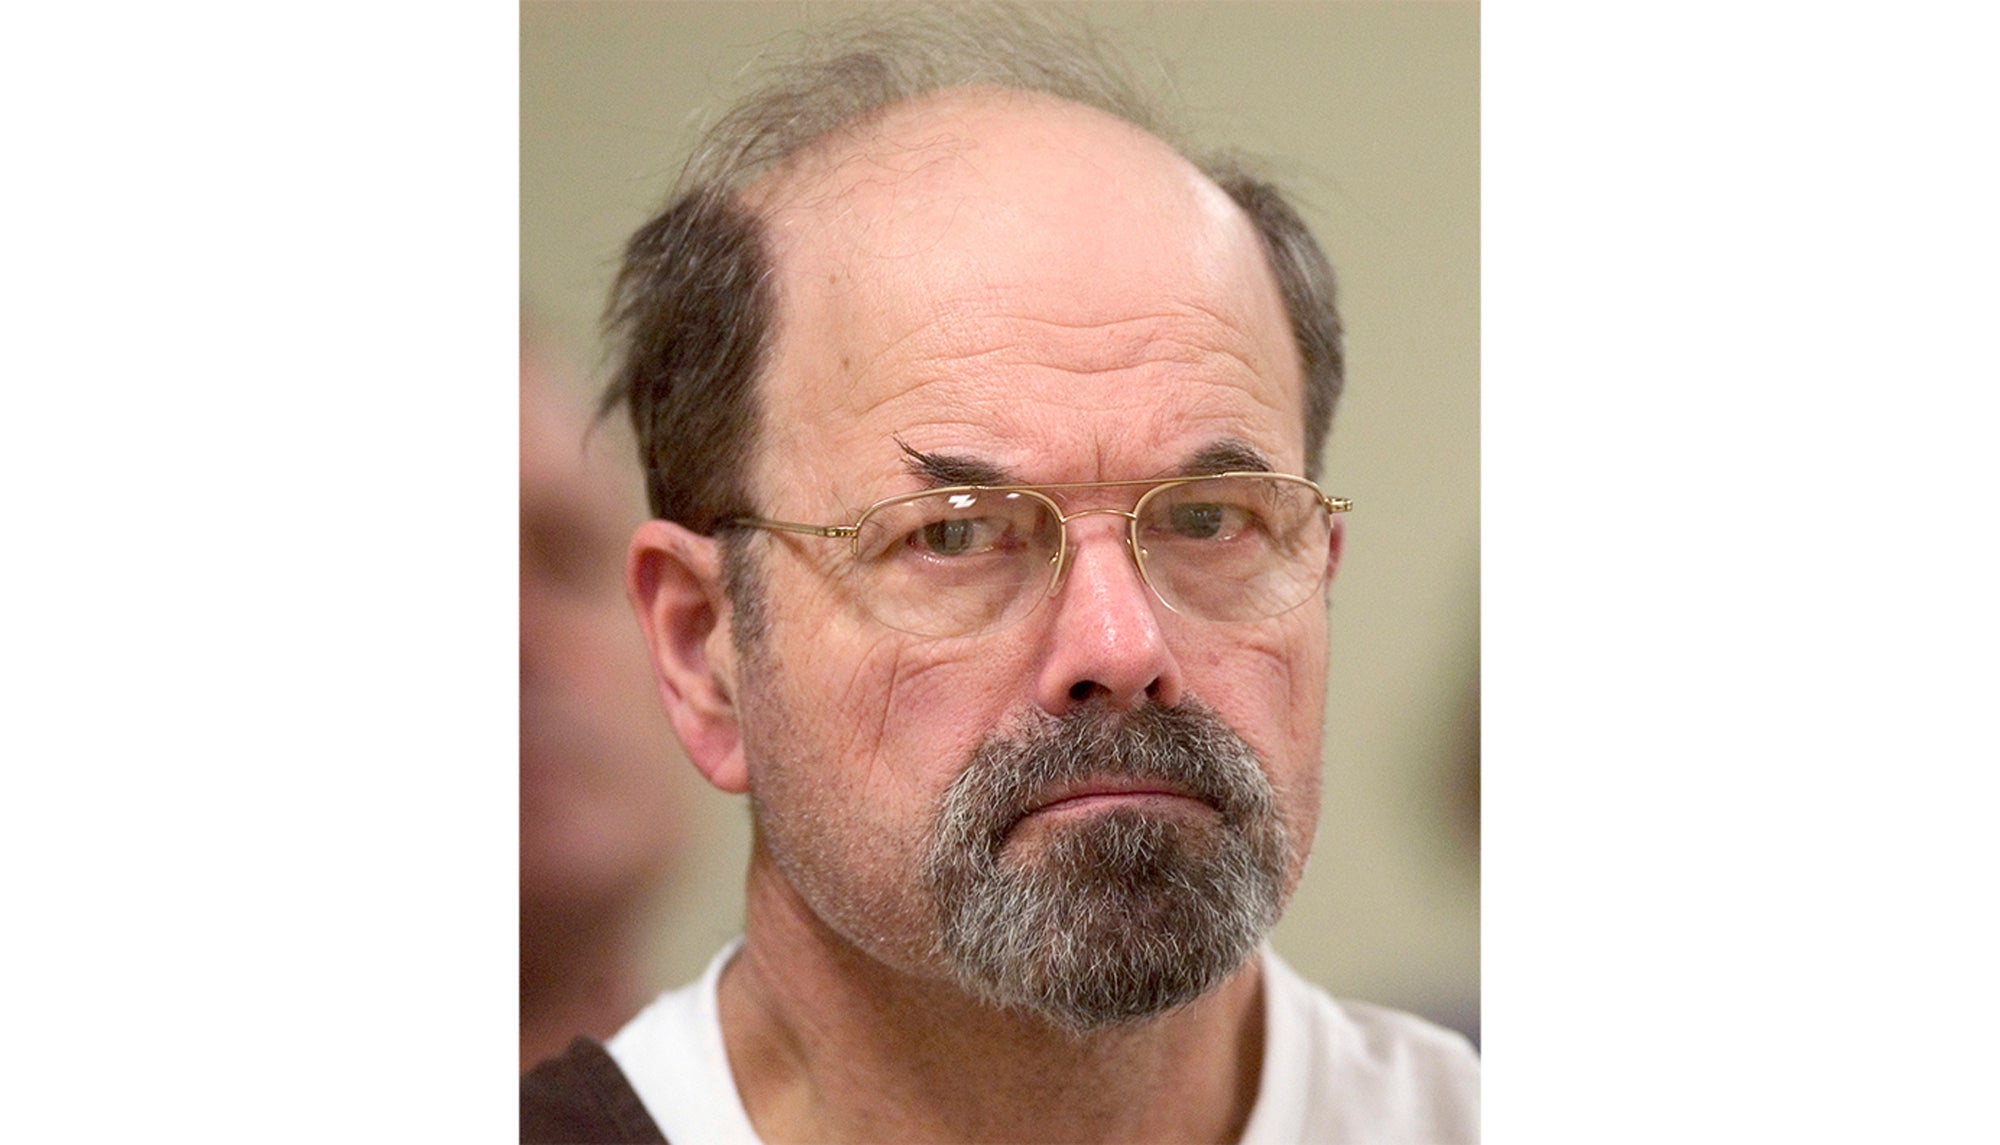 Dennis Rader, also known as the BTK killer, may be linked to a 1976 cold case disappearance